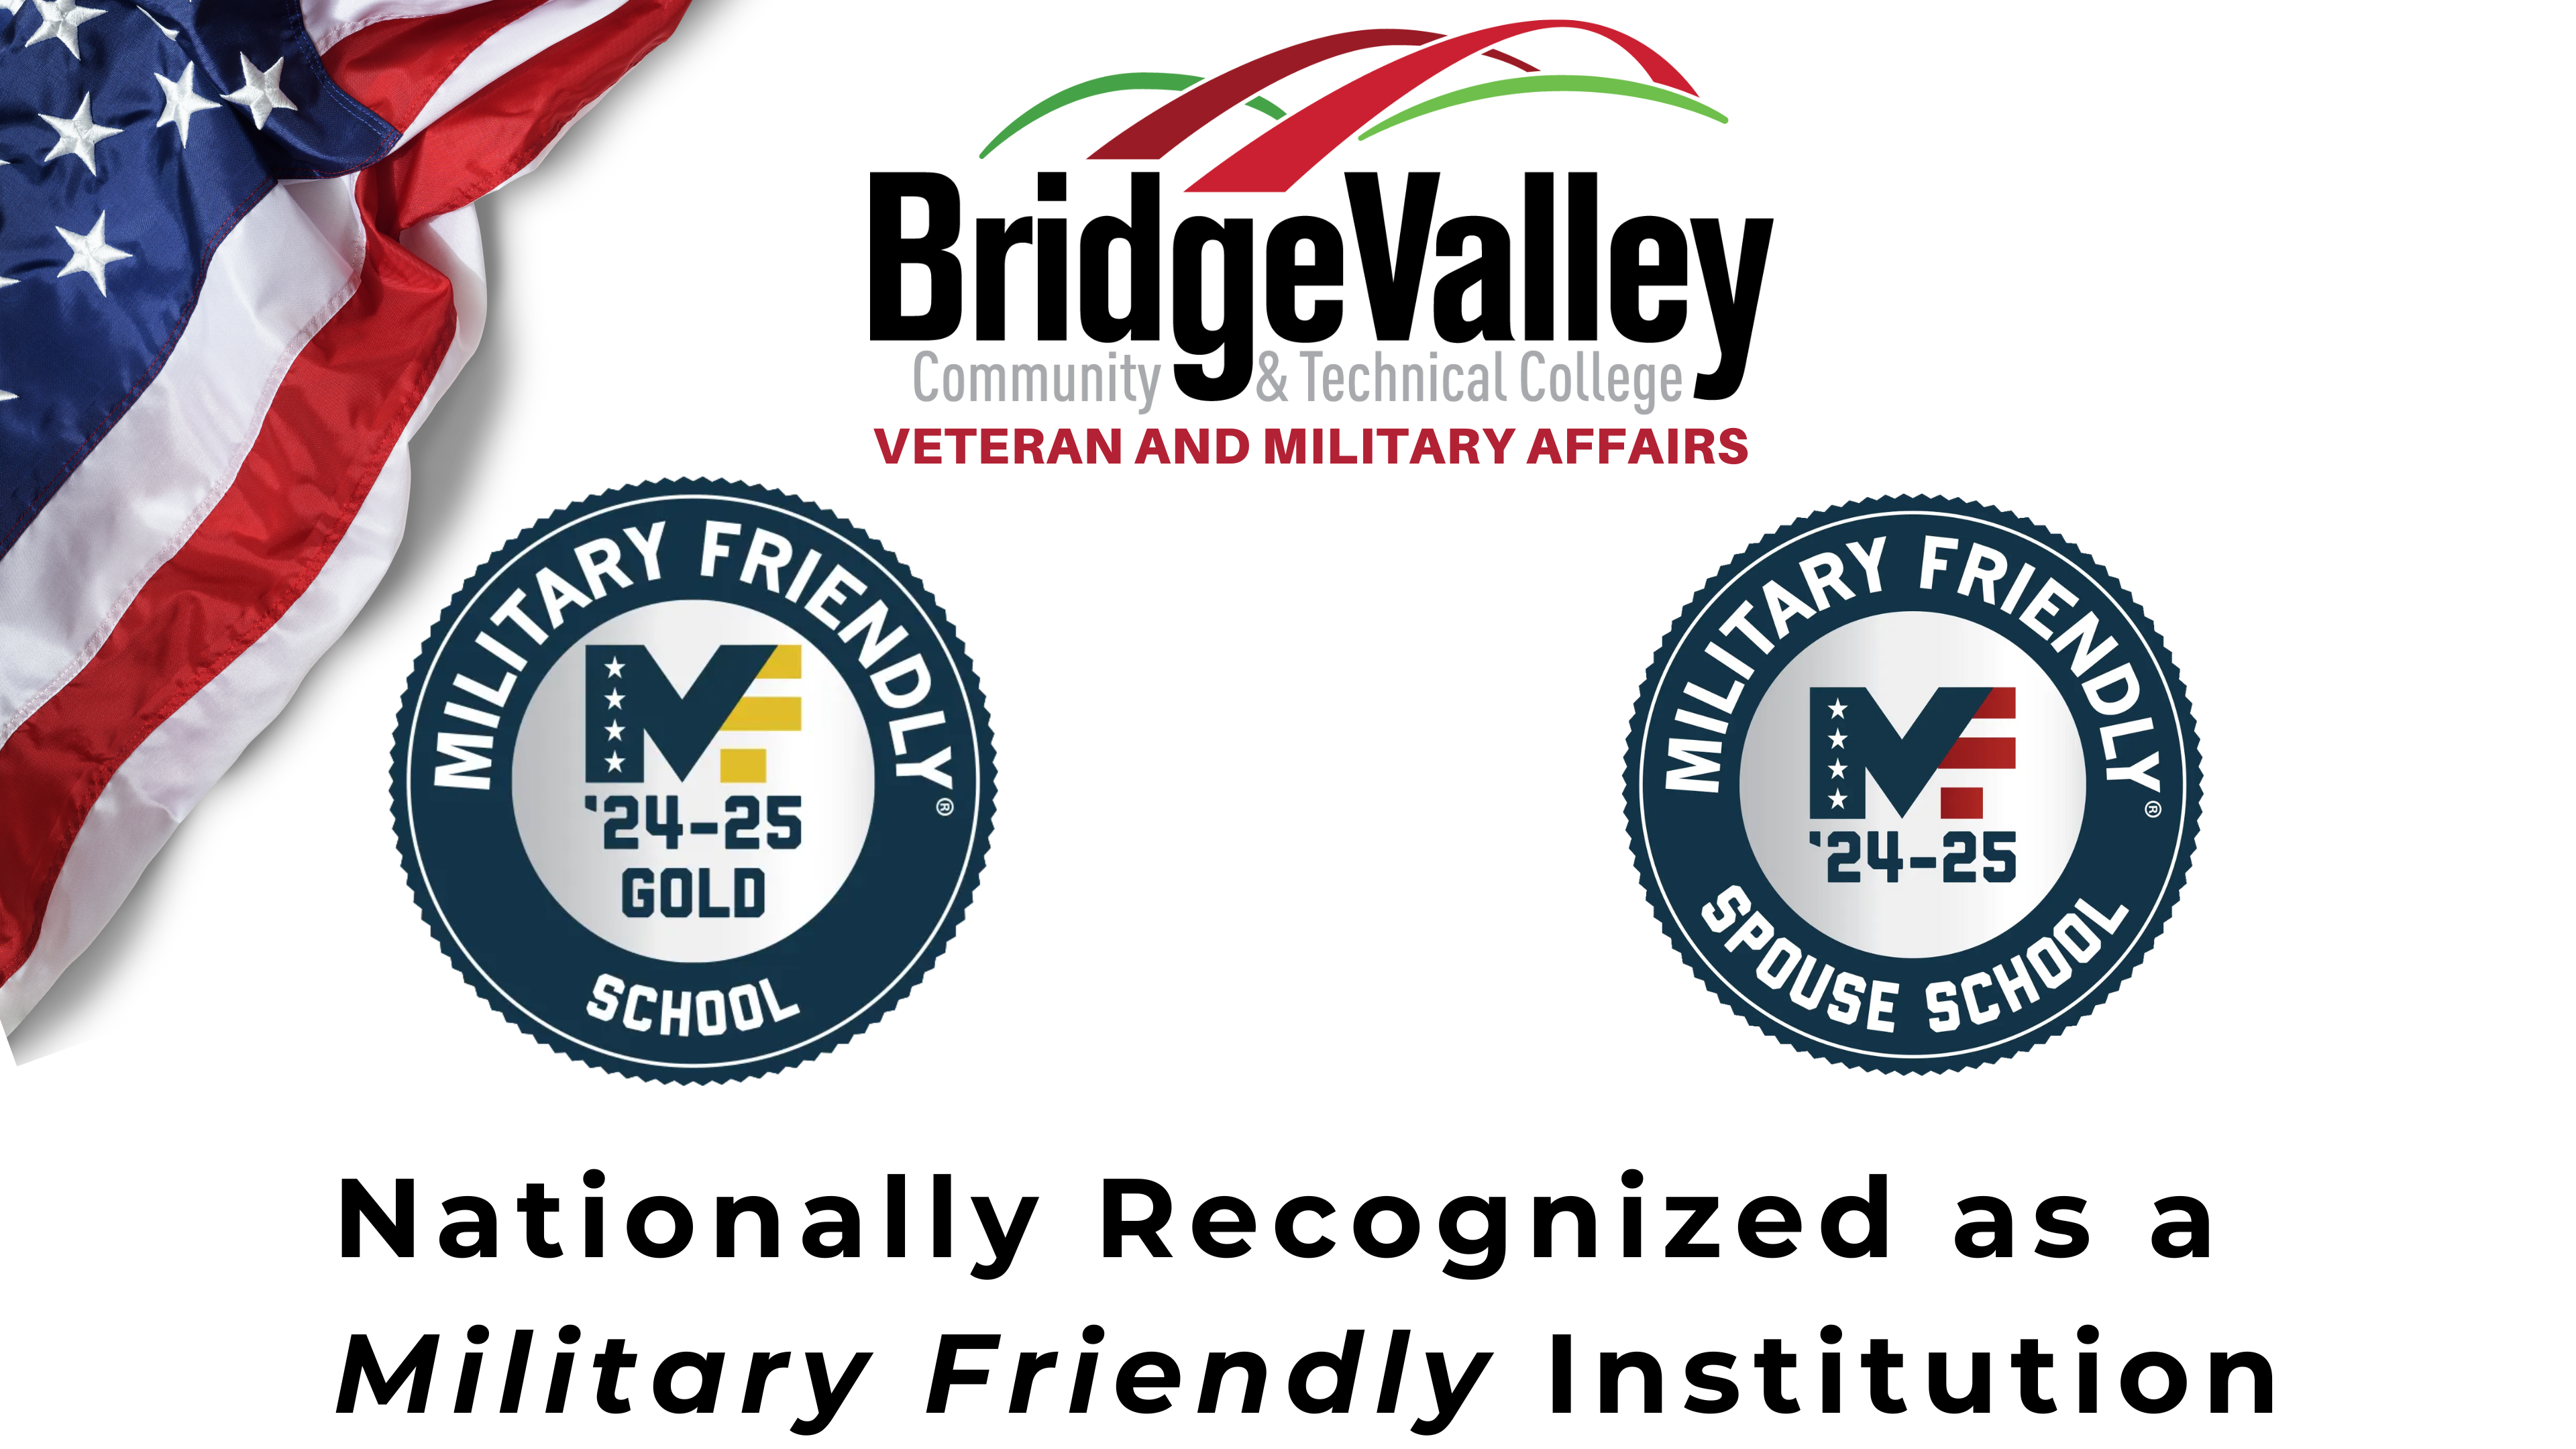 Military Friendly Military and Veteran Affairs